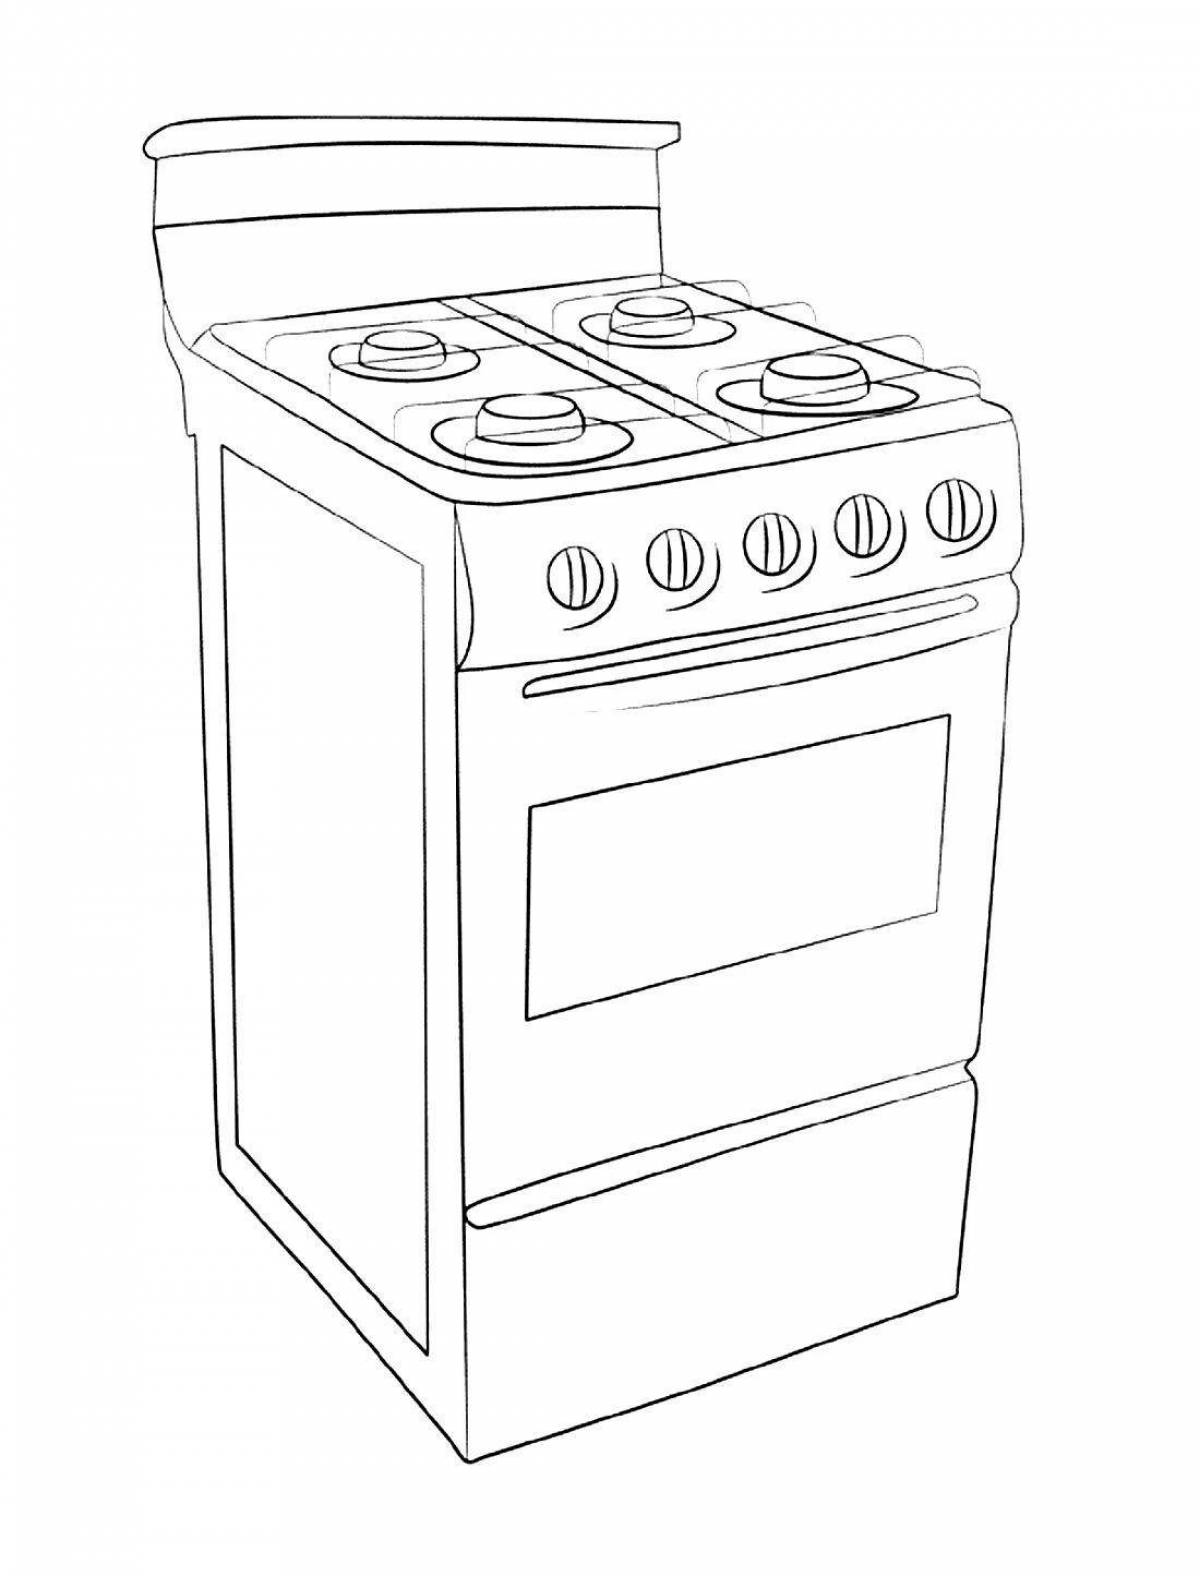 Fashion cooker coloring page